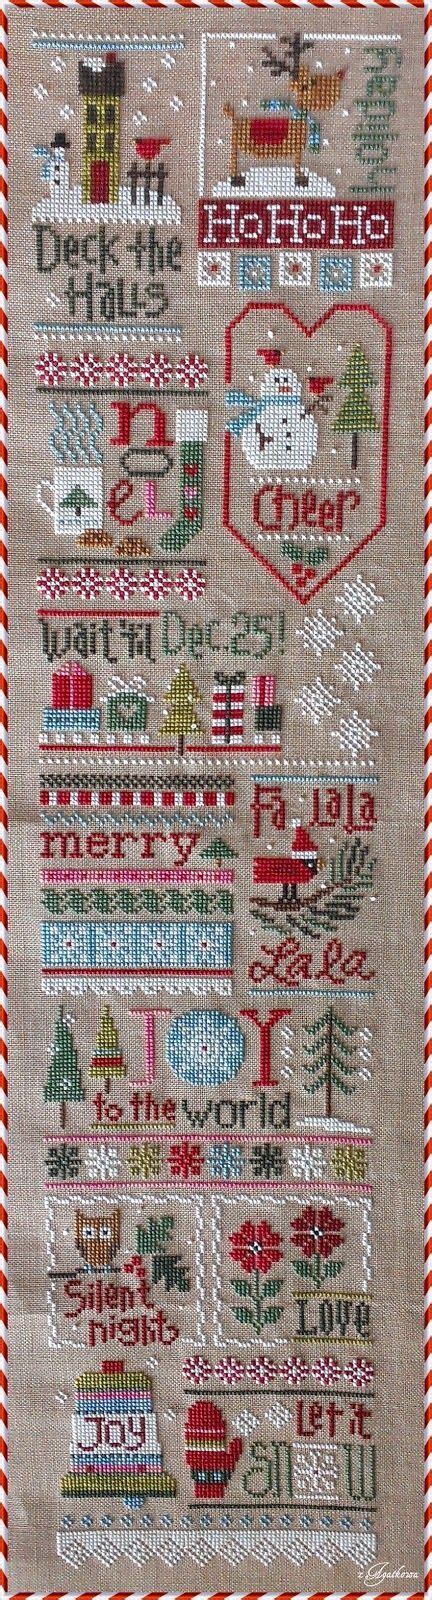 Free cross stitch patterns go cross stitch crazy with our huge selection of free cross stitch patterns! free christmas cross stitch patterns - Google Search ...